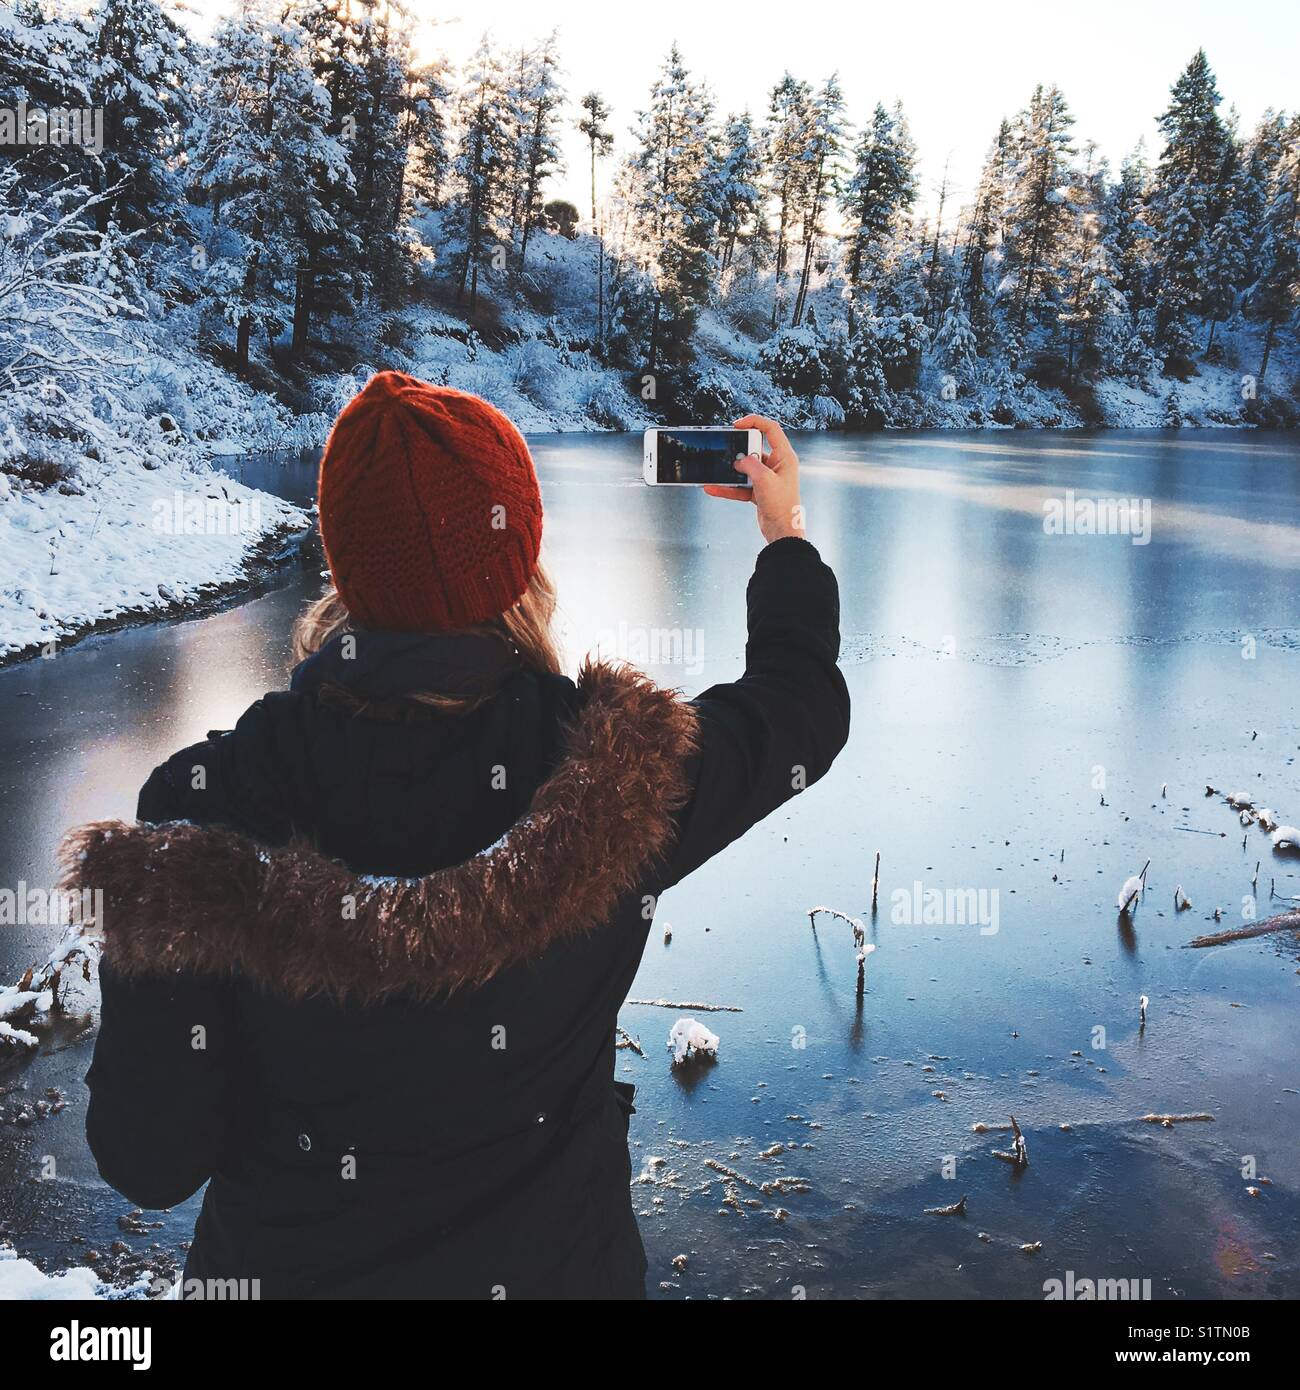 Woman in winter clothes and red hat taking a photograph with her iPhone of a frozen lake surrounded by snow covered trees. Stock Photo